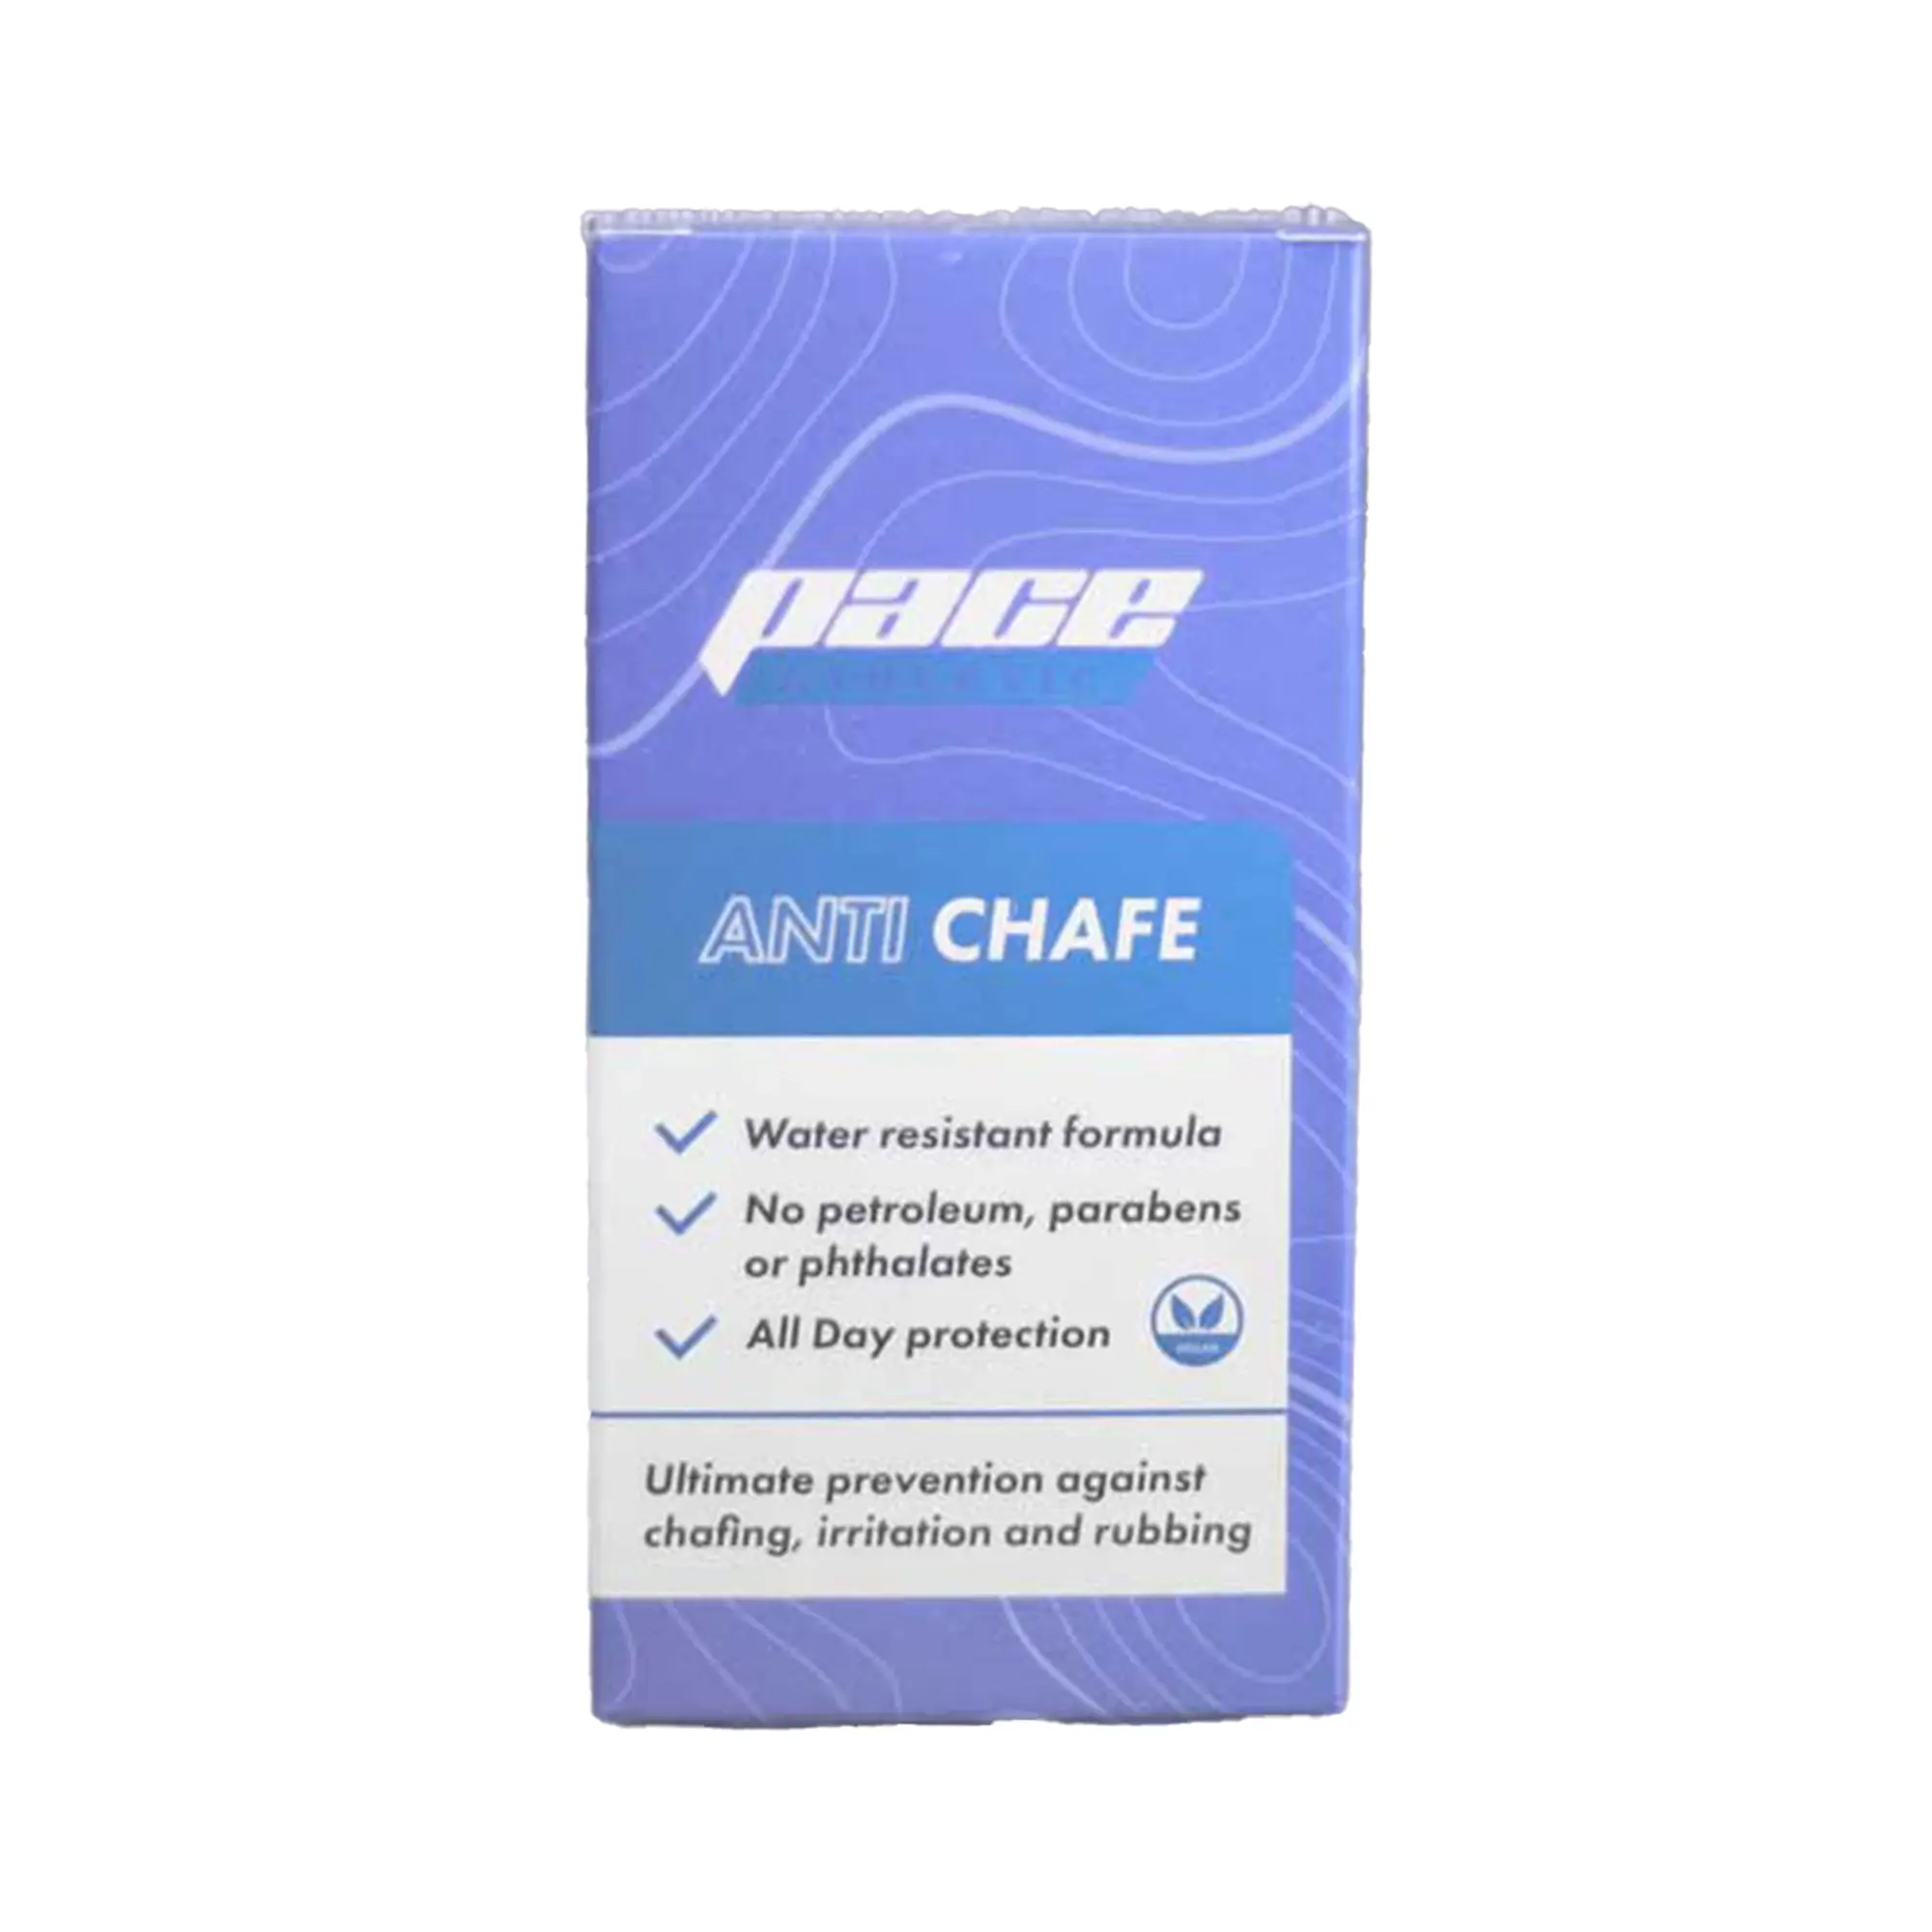 Pace Athletic Anti Chafe